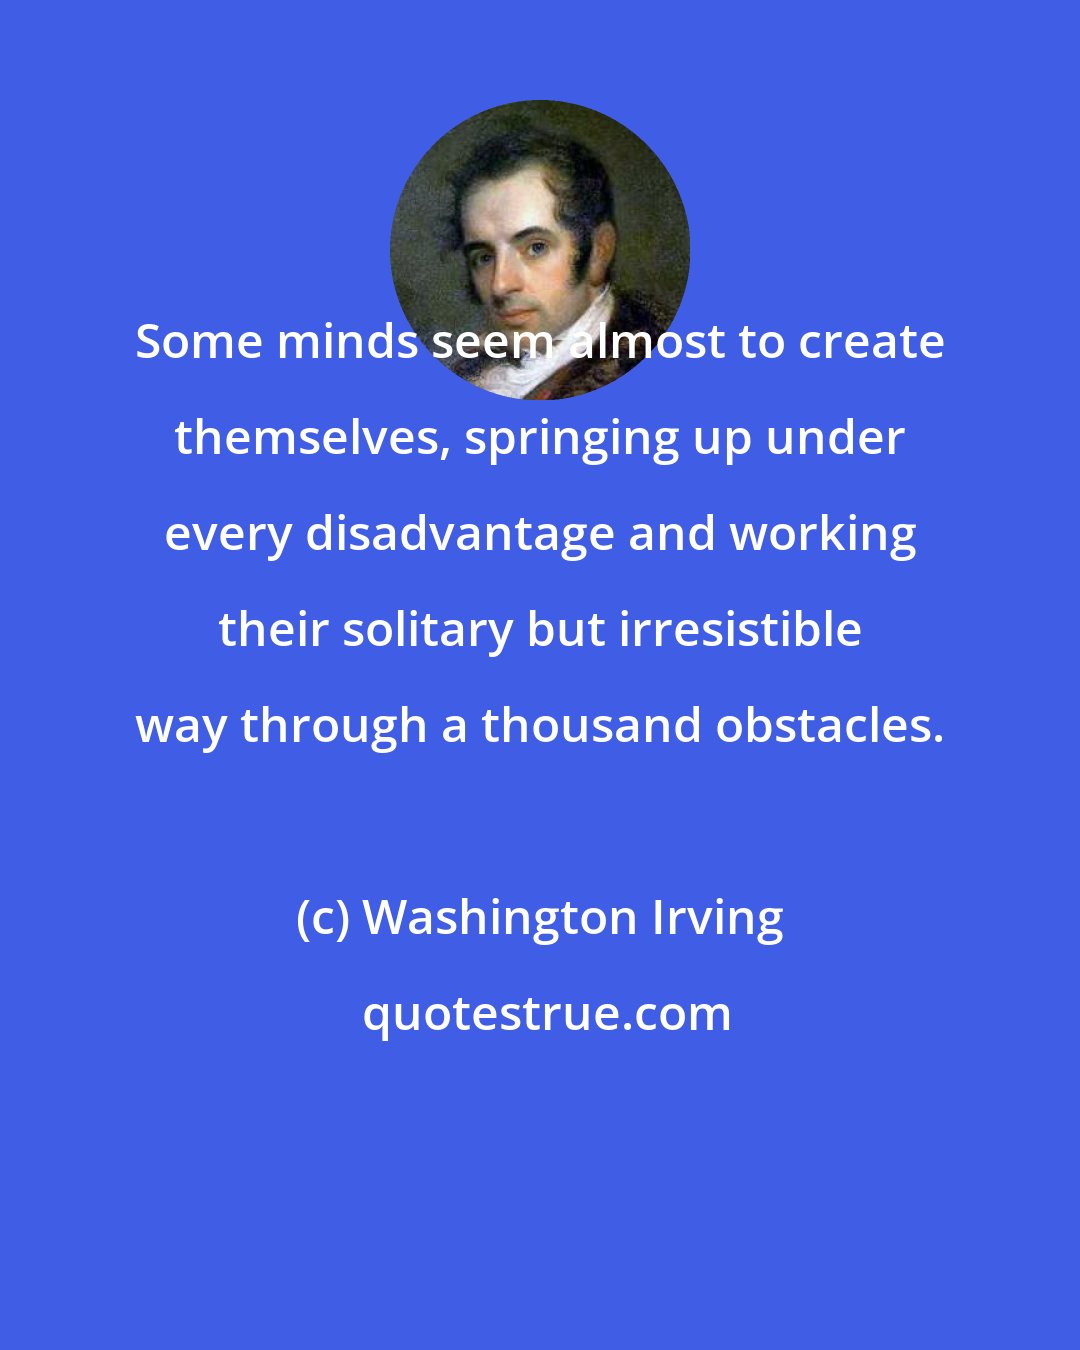 Washington Irving: Some minds seem almost to create themselves, springing up under every disadvantage and working their solitary but irresistible way through a thousand obstacles.